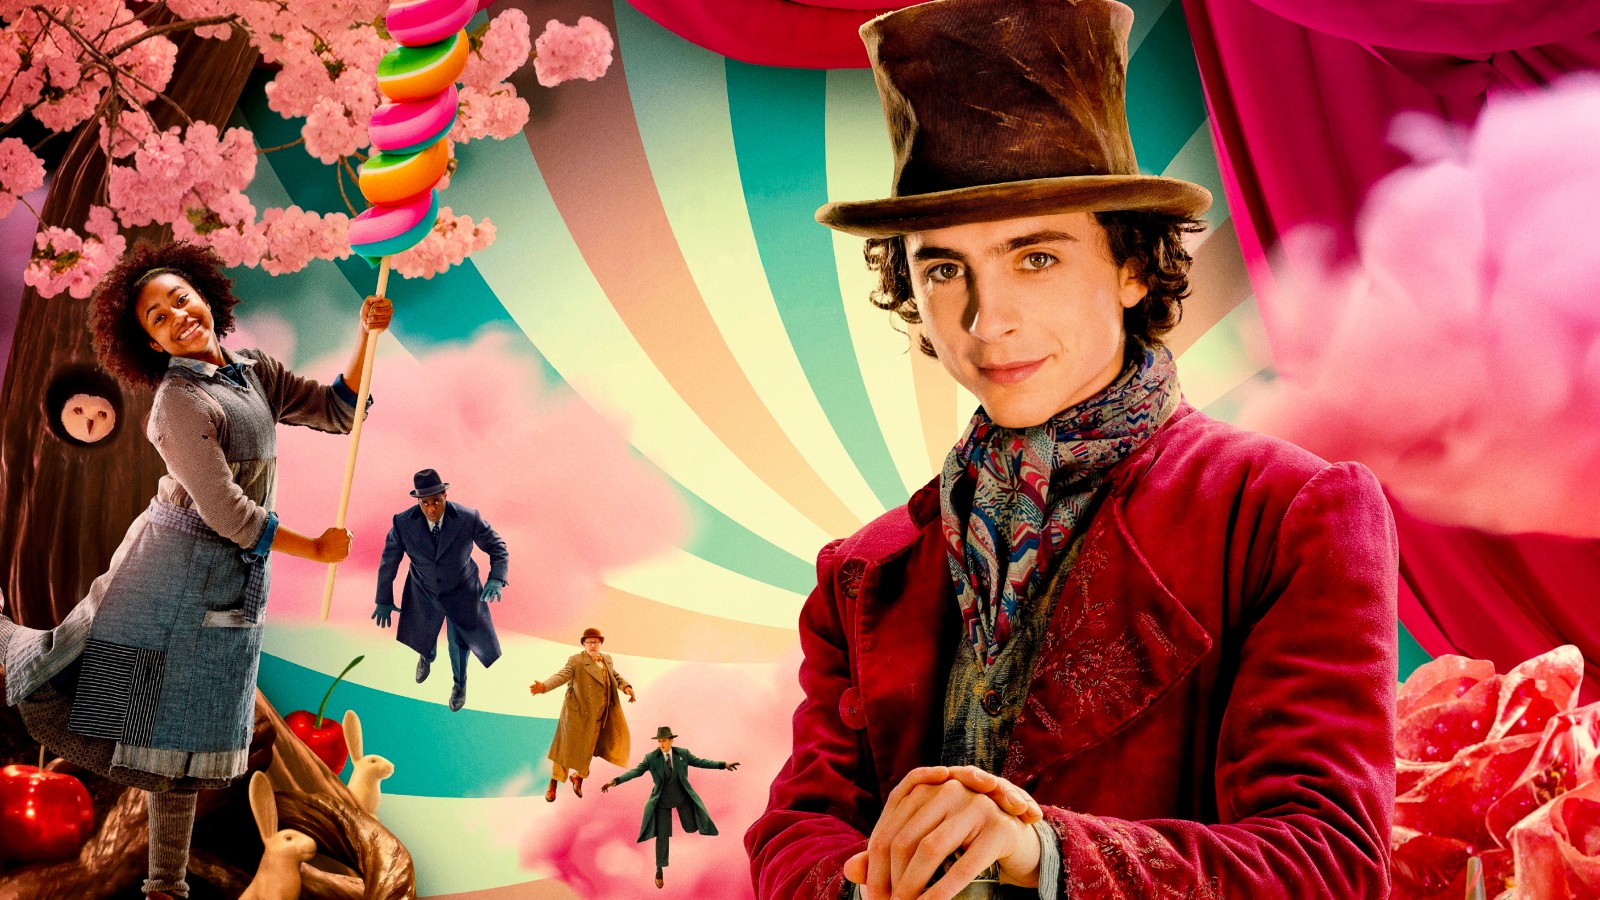 Willy Wonka & The Chocolate Factory - Movies on Google Play